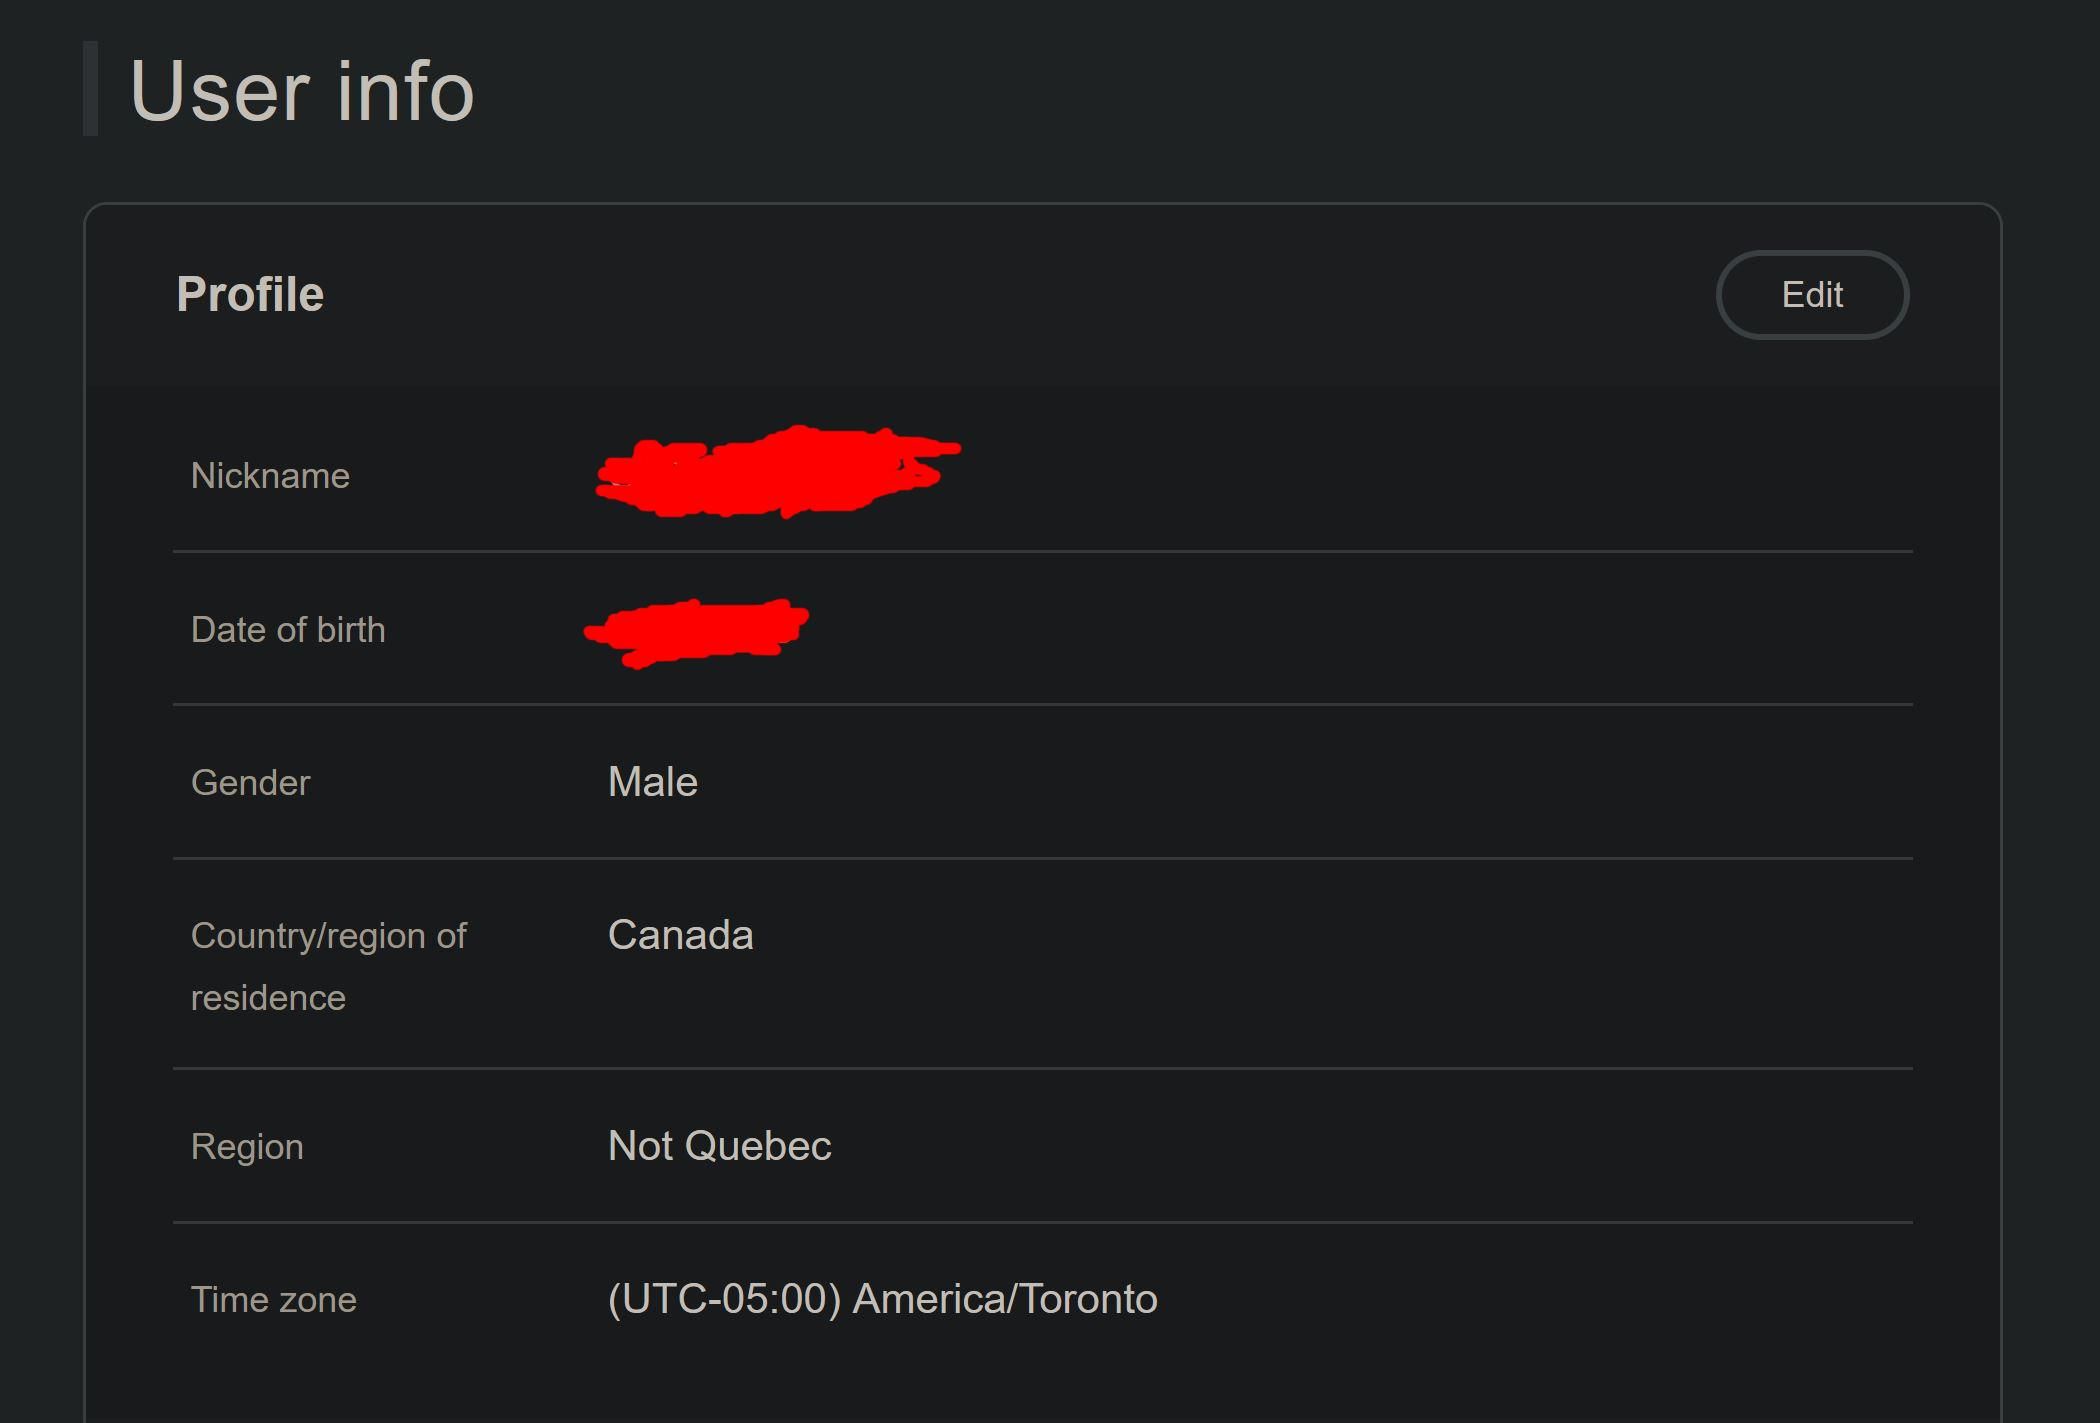 My Nintendo profile shows me in the Canadian region of "Not Quebec"